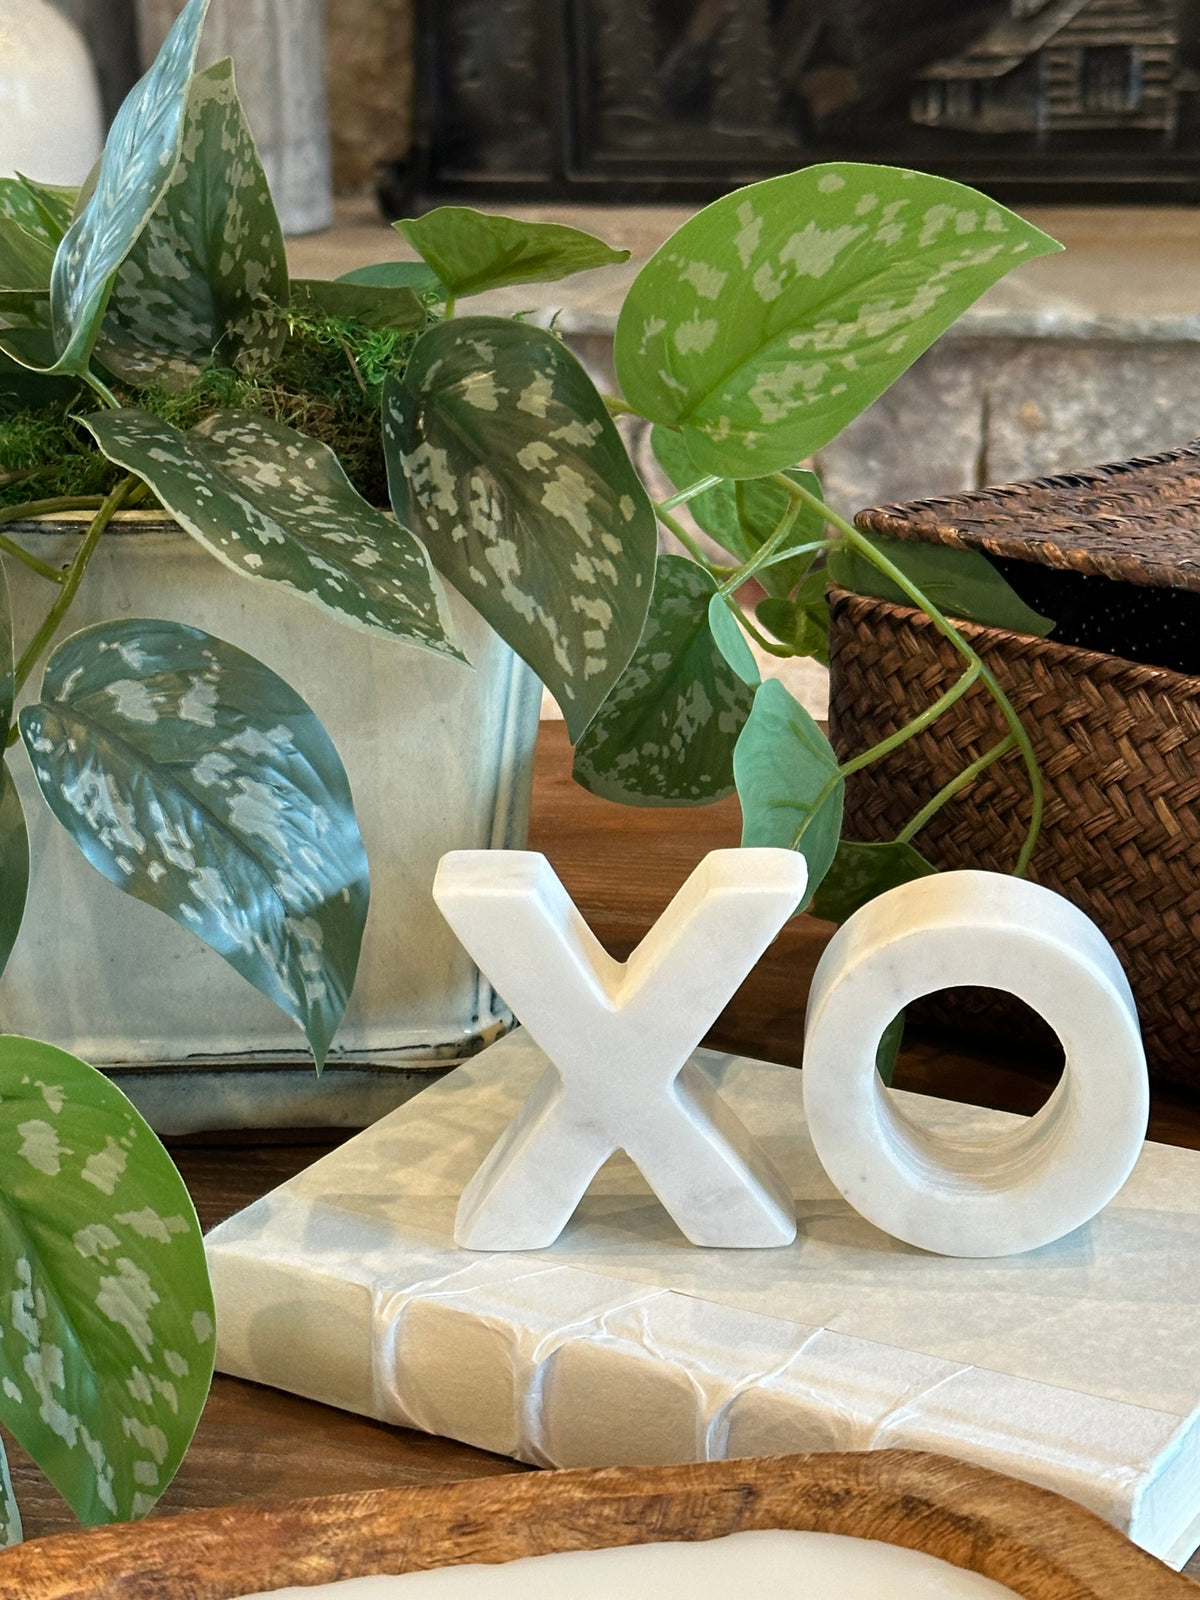 Home Decor - XO Marble Letters